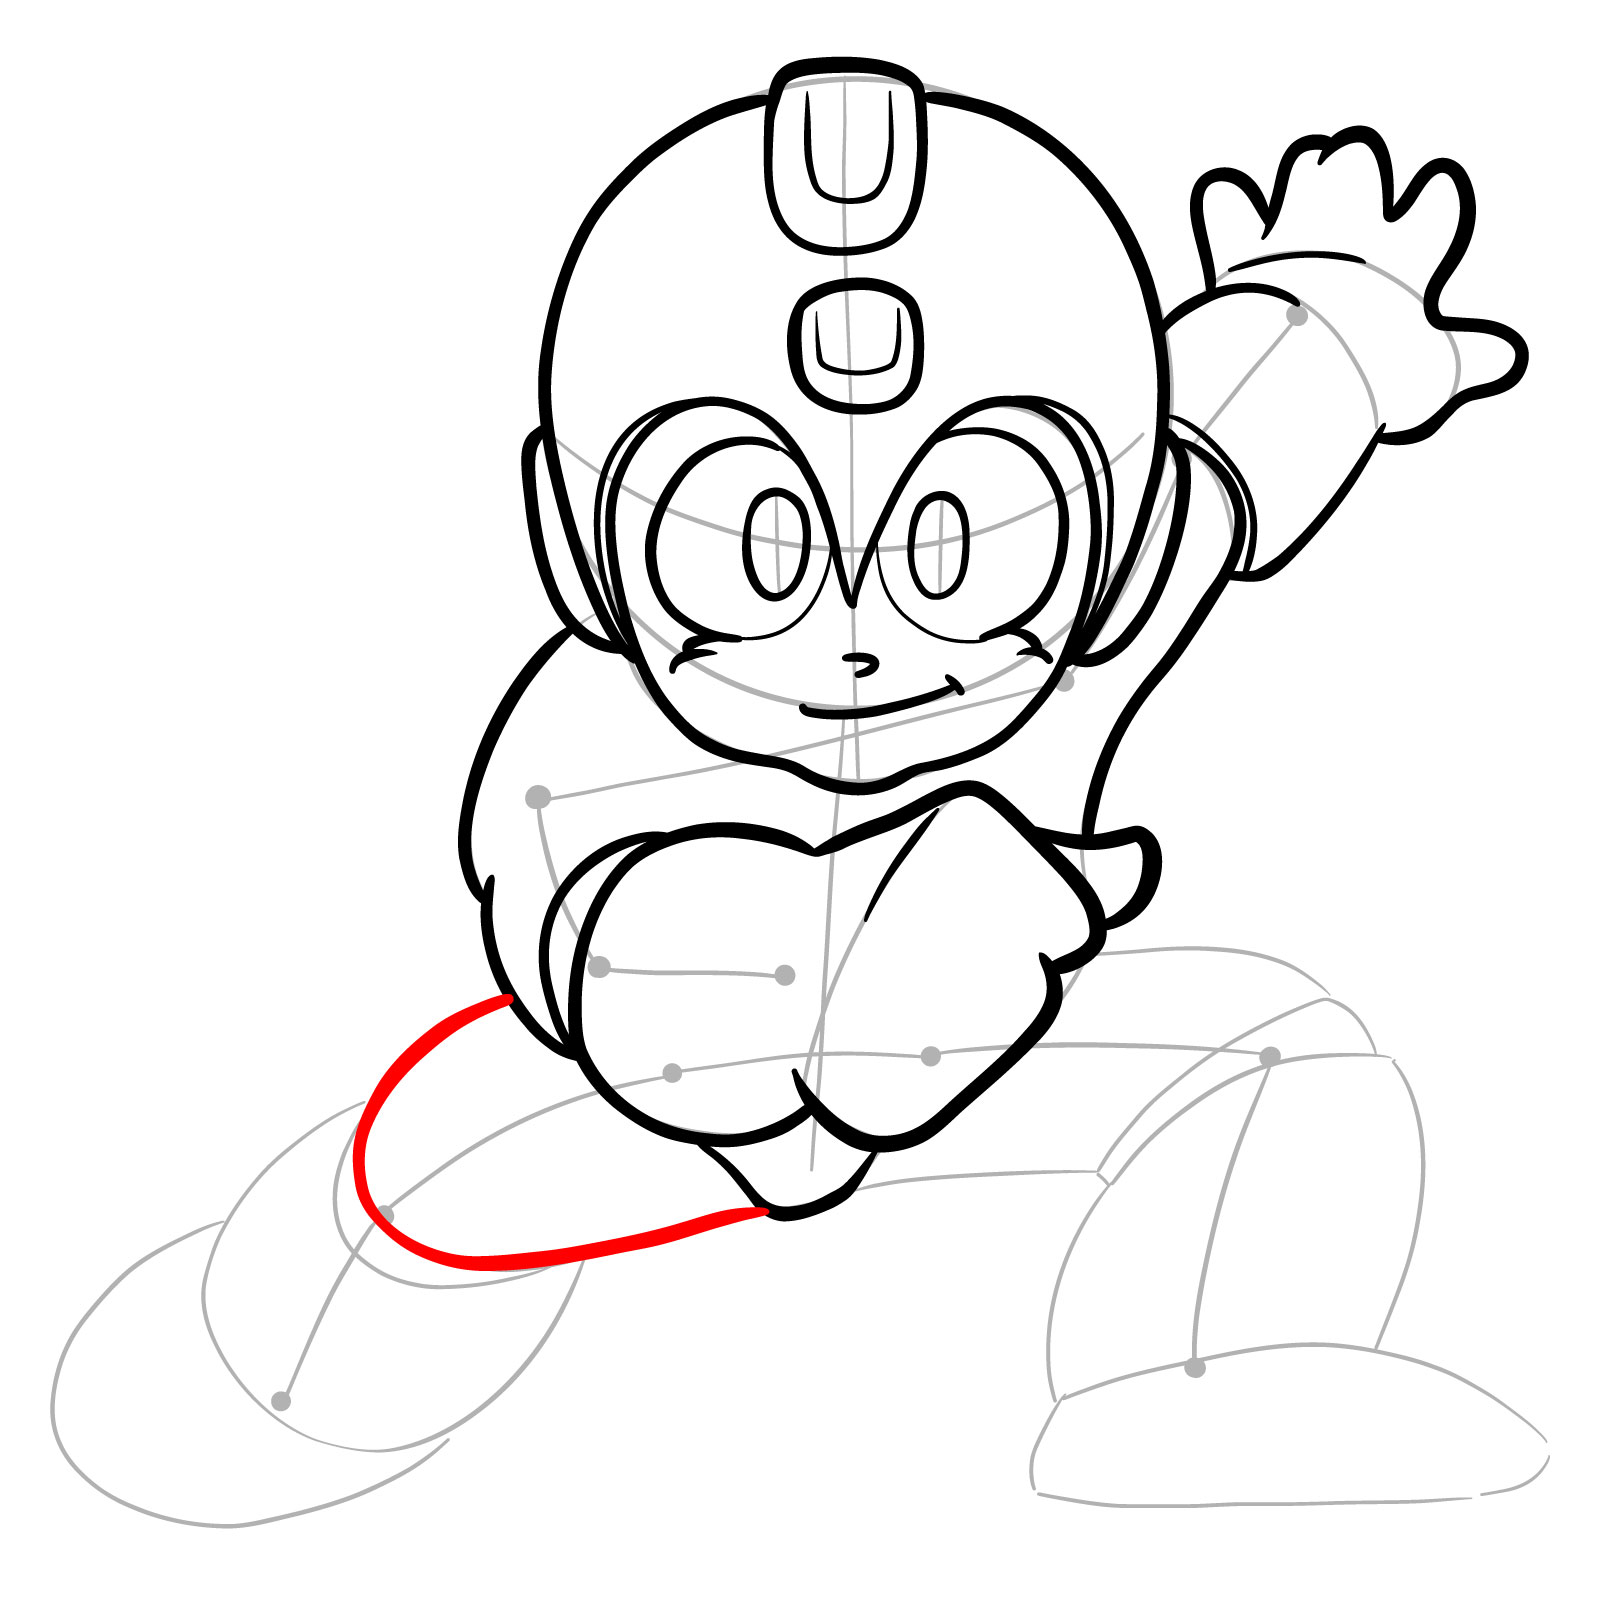 How to draw Mega Man from the original game - step 19